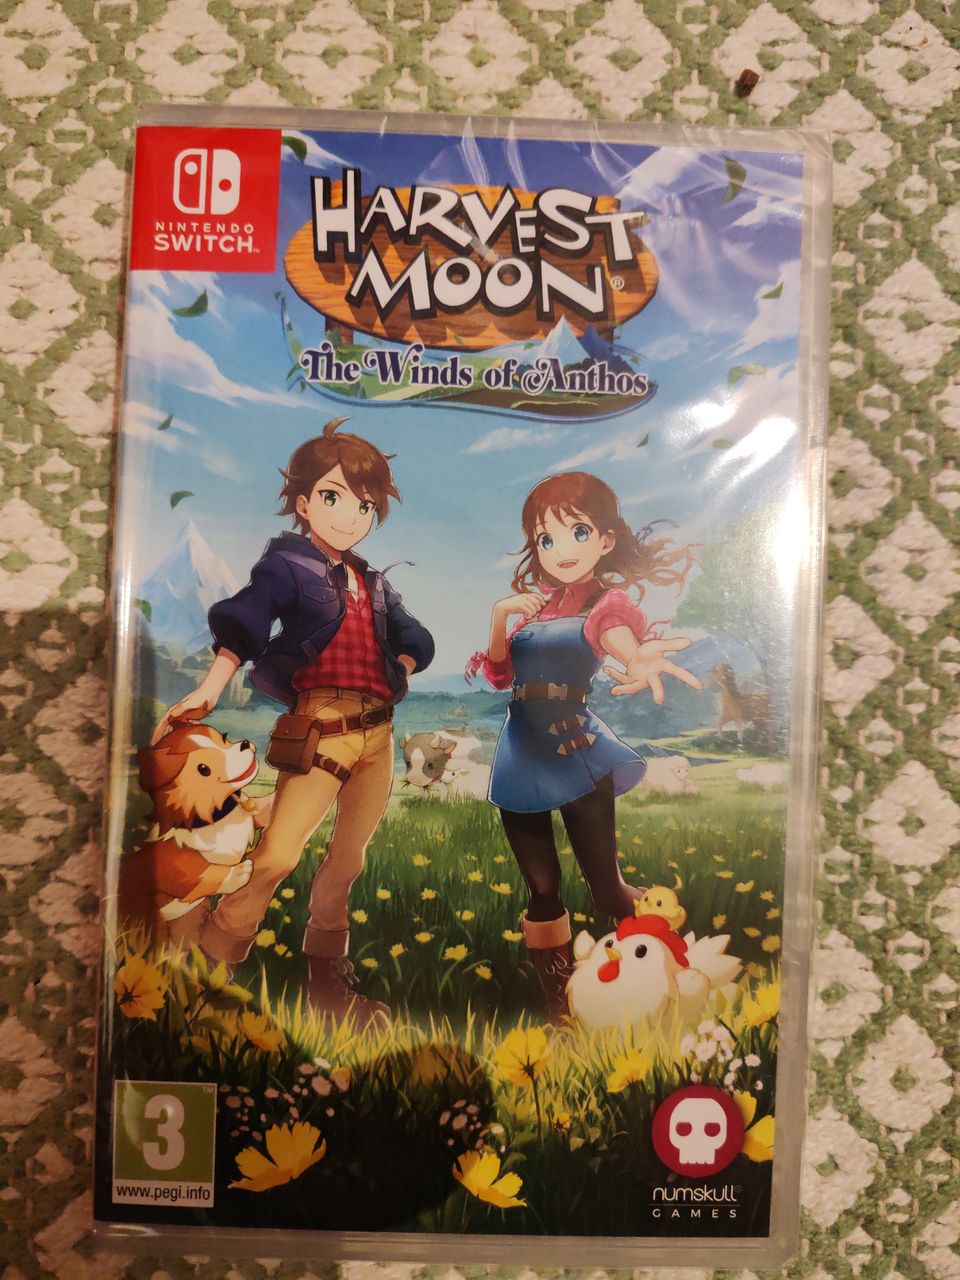 Harvest moon the winds of anthos